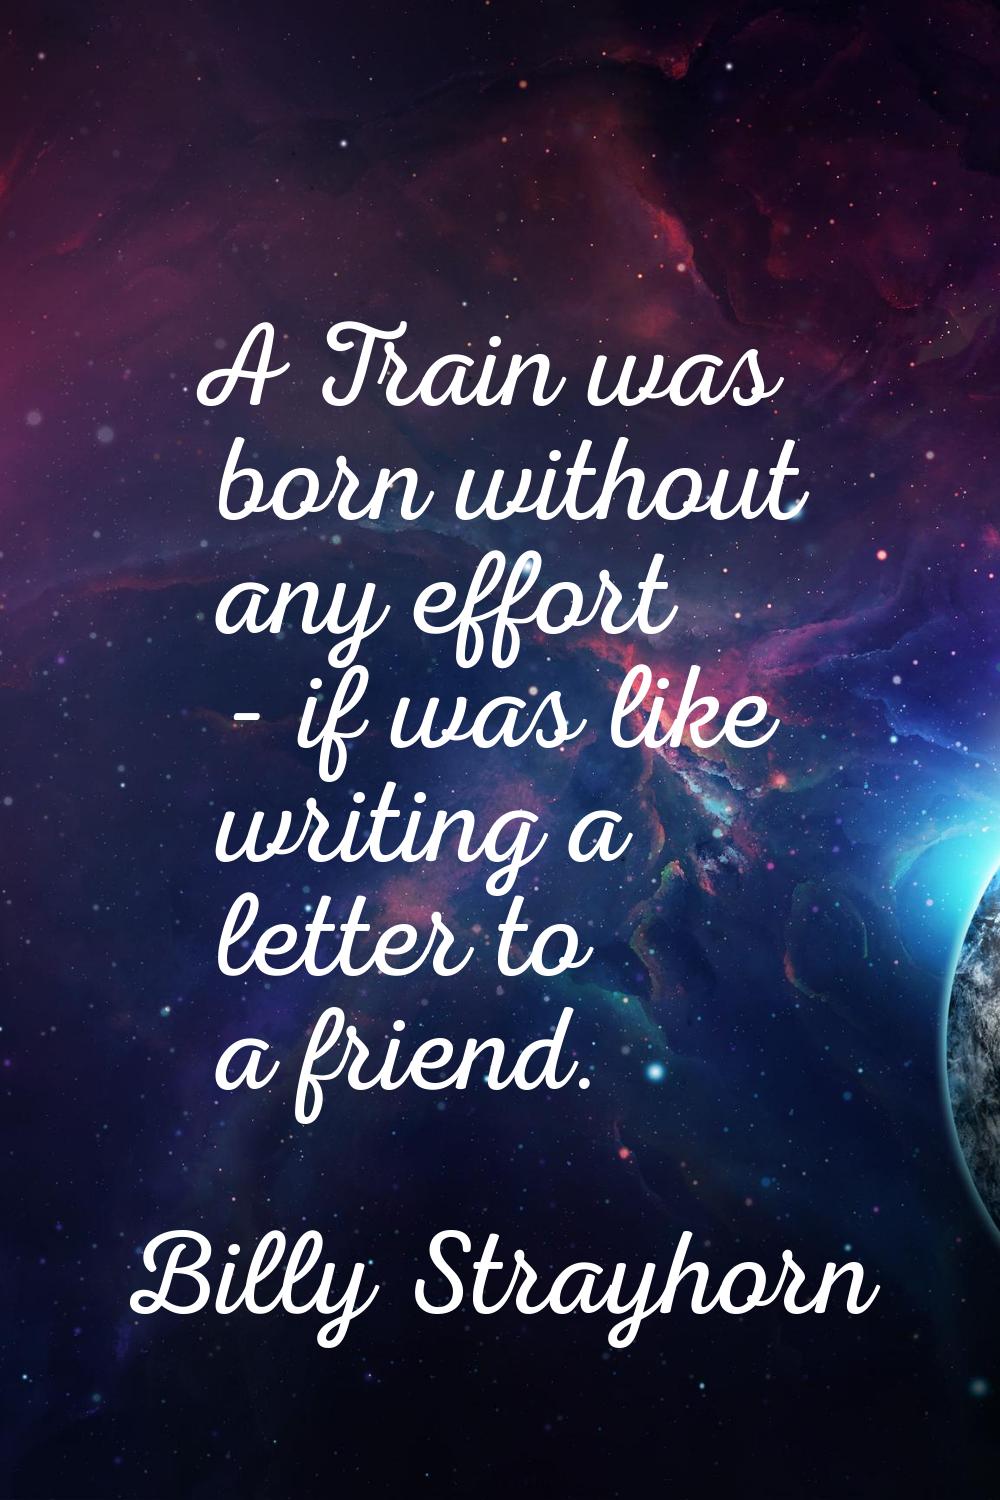 A Train was born without any effort - if was like writing a letter to a friend.